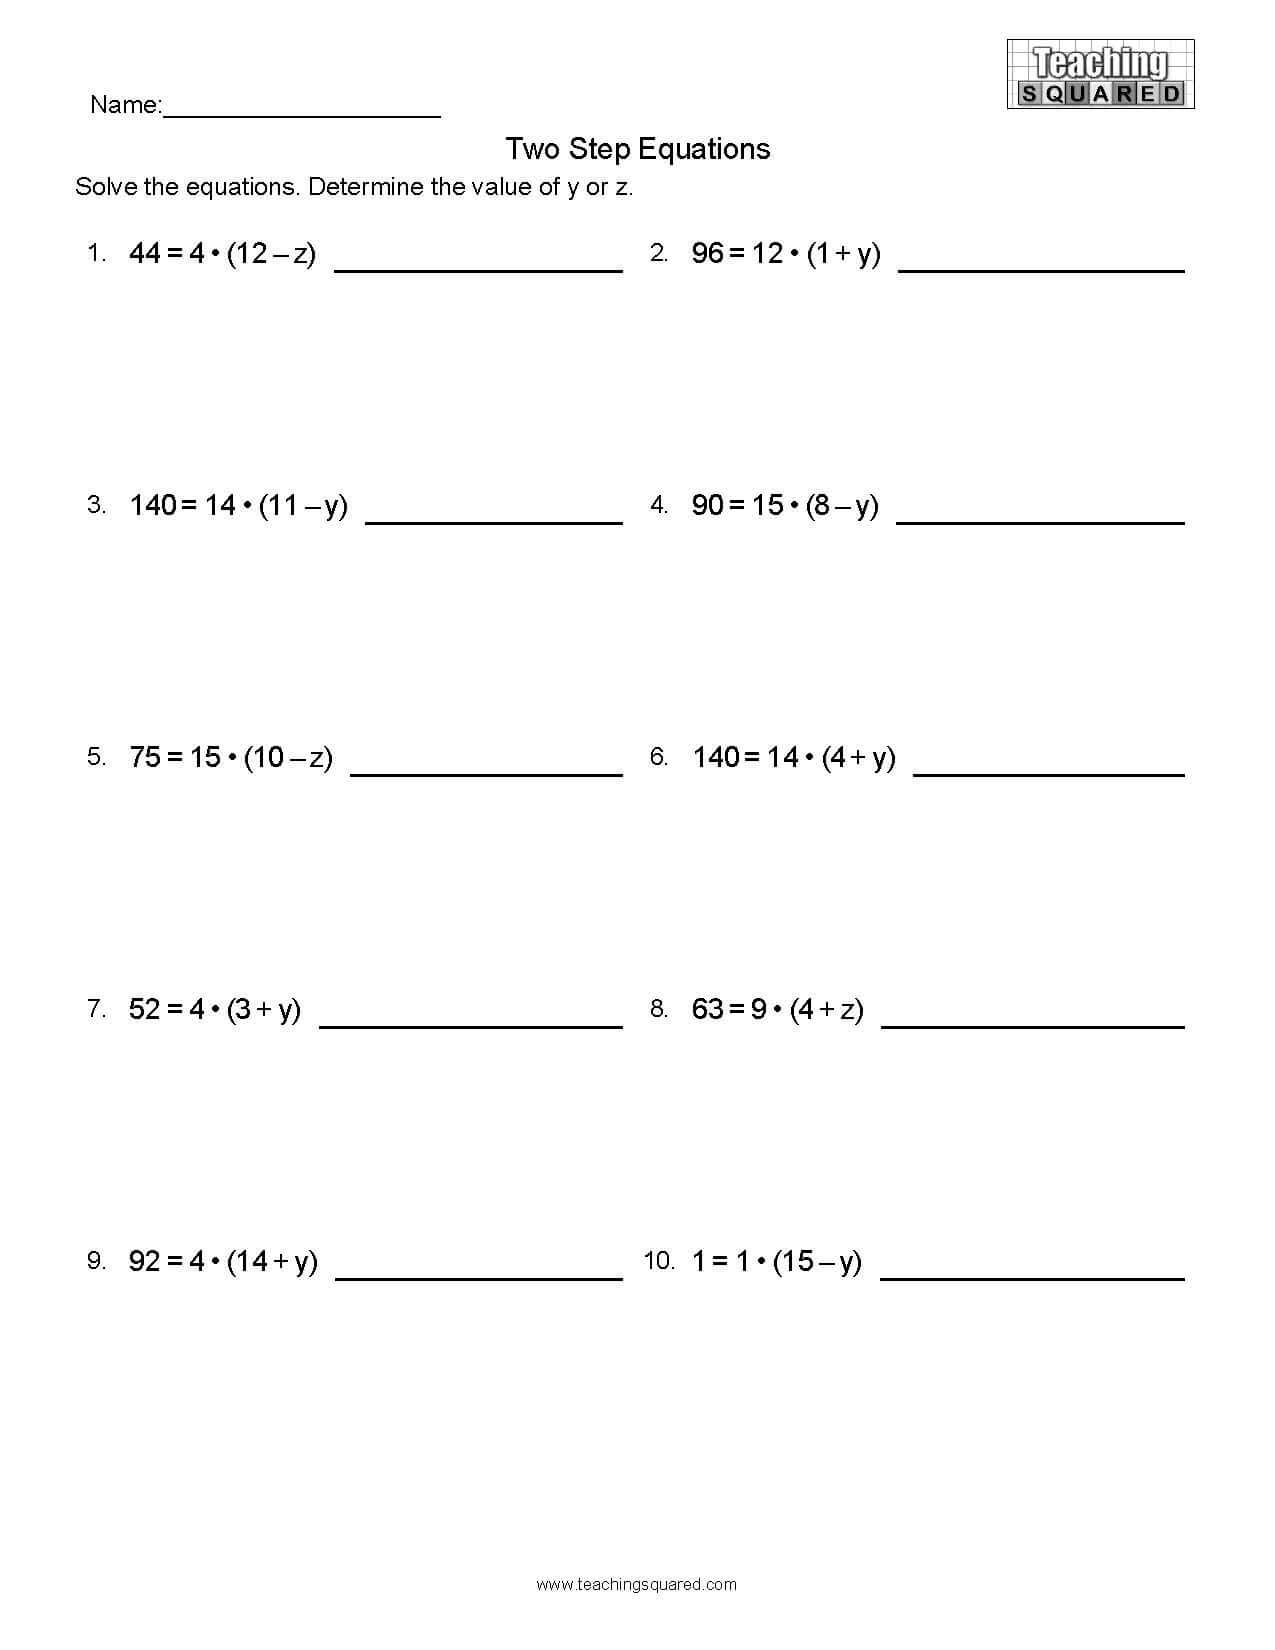 Two Step Equations Worksheet Pdf Equations Parenthesis R1 Teaching Squared